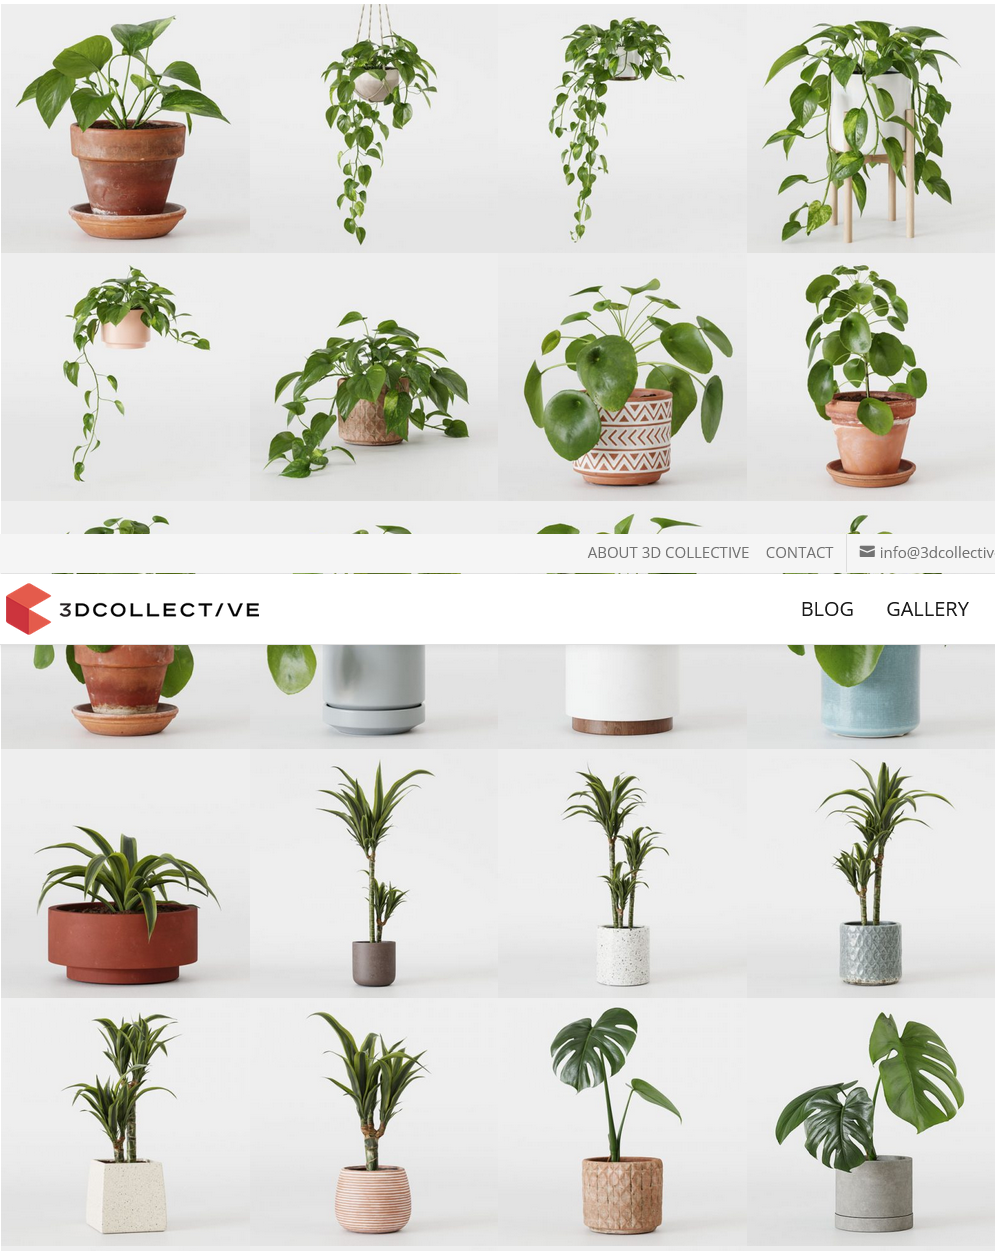 48 Interior 3D Plants Pack 01 | 3DCollective